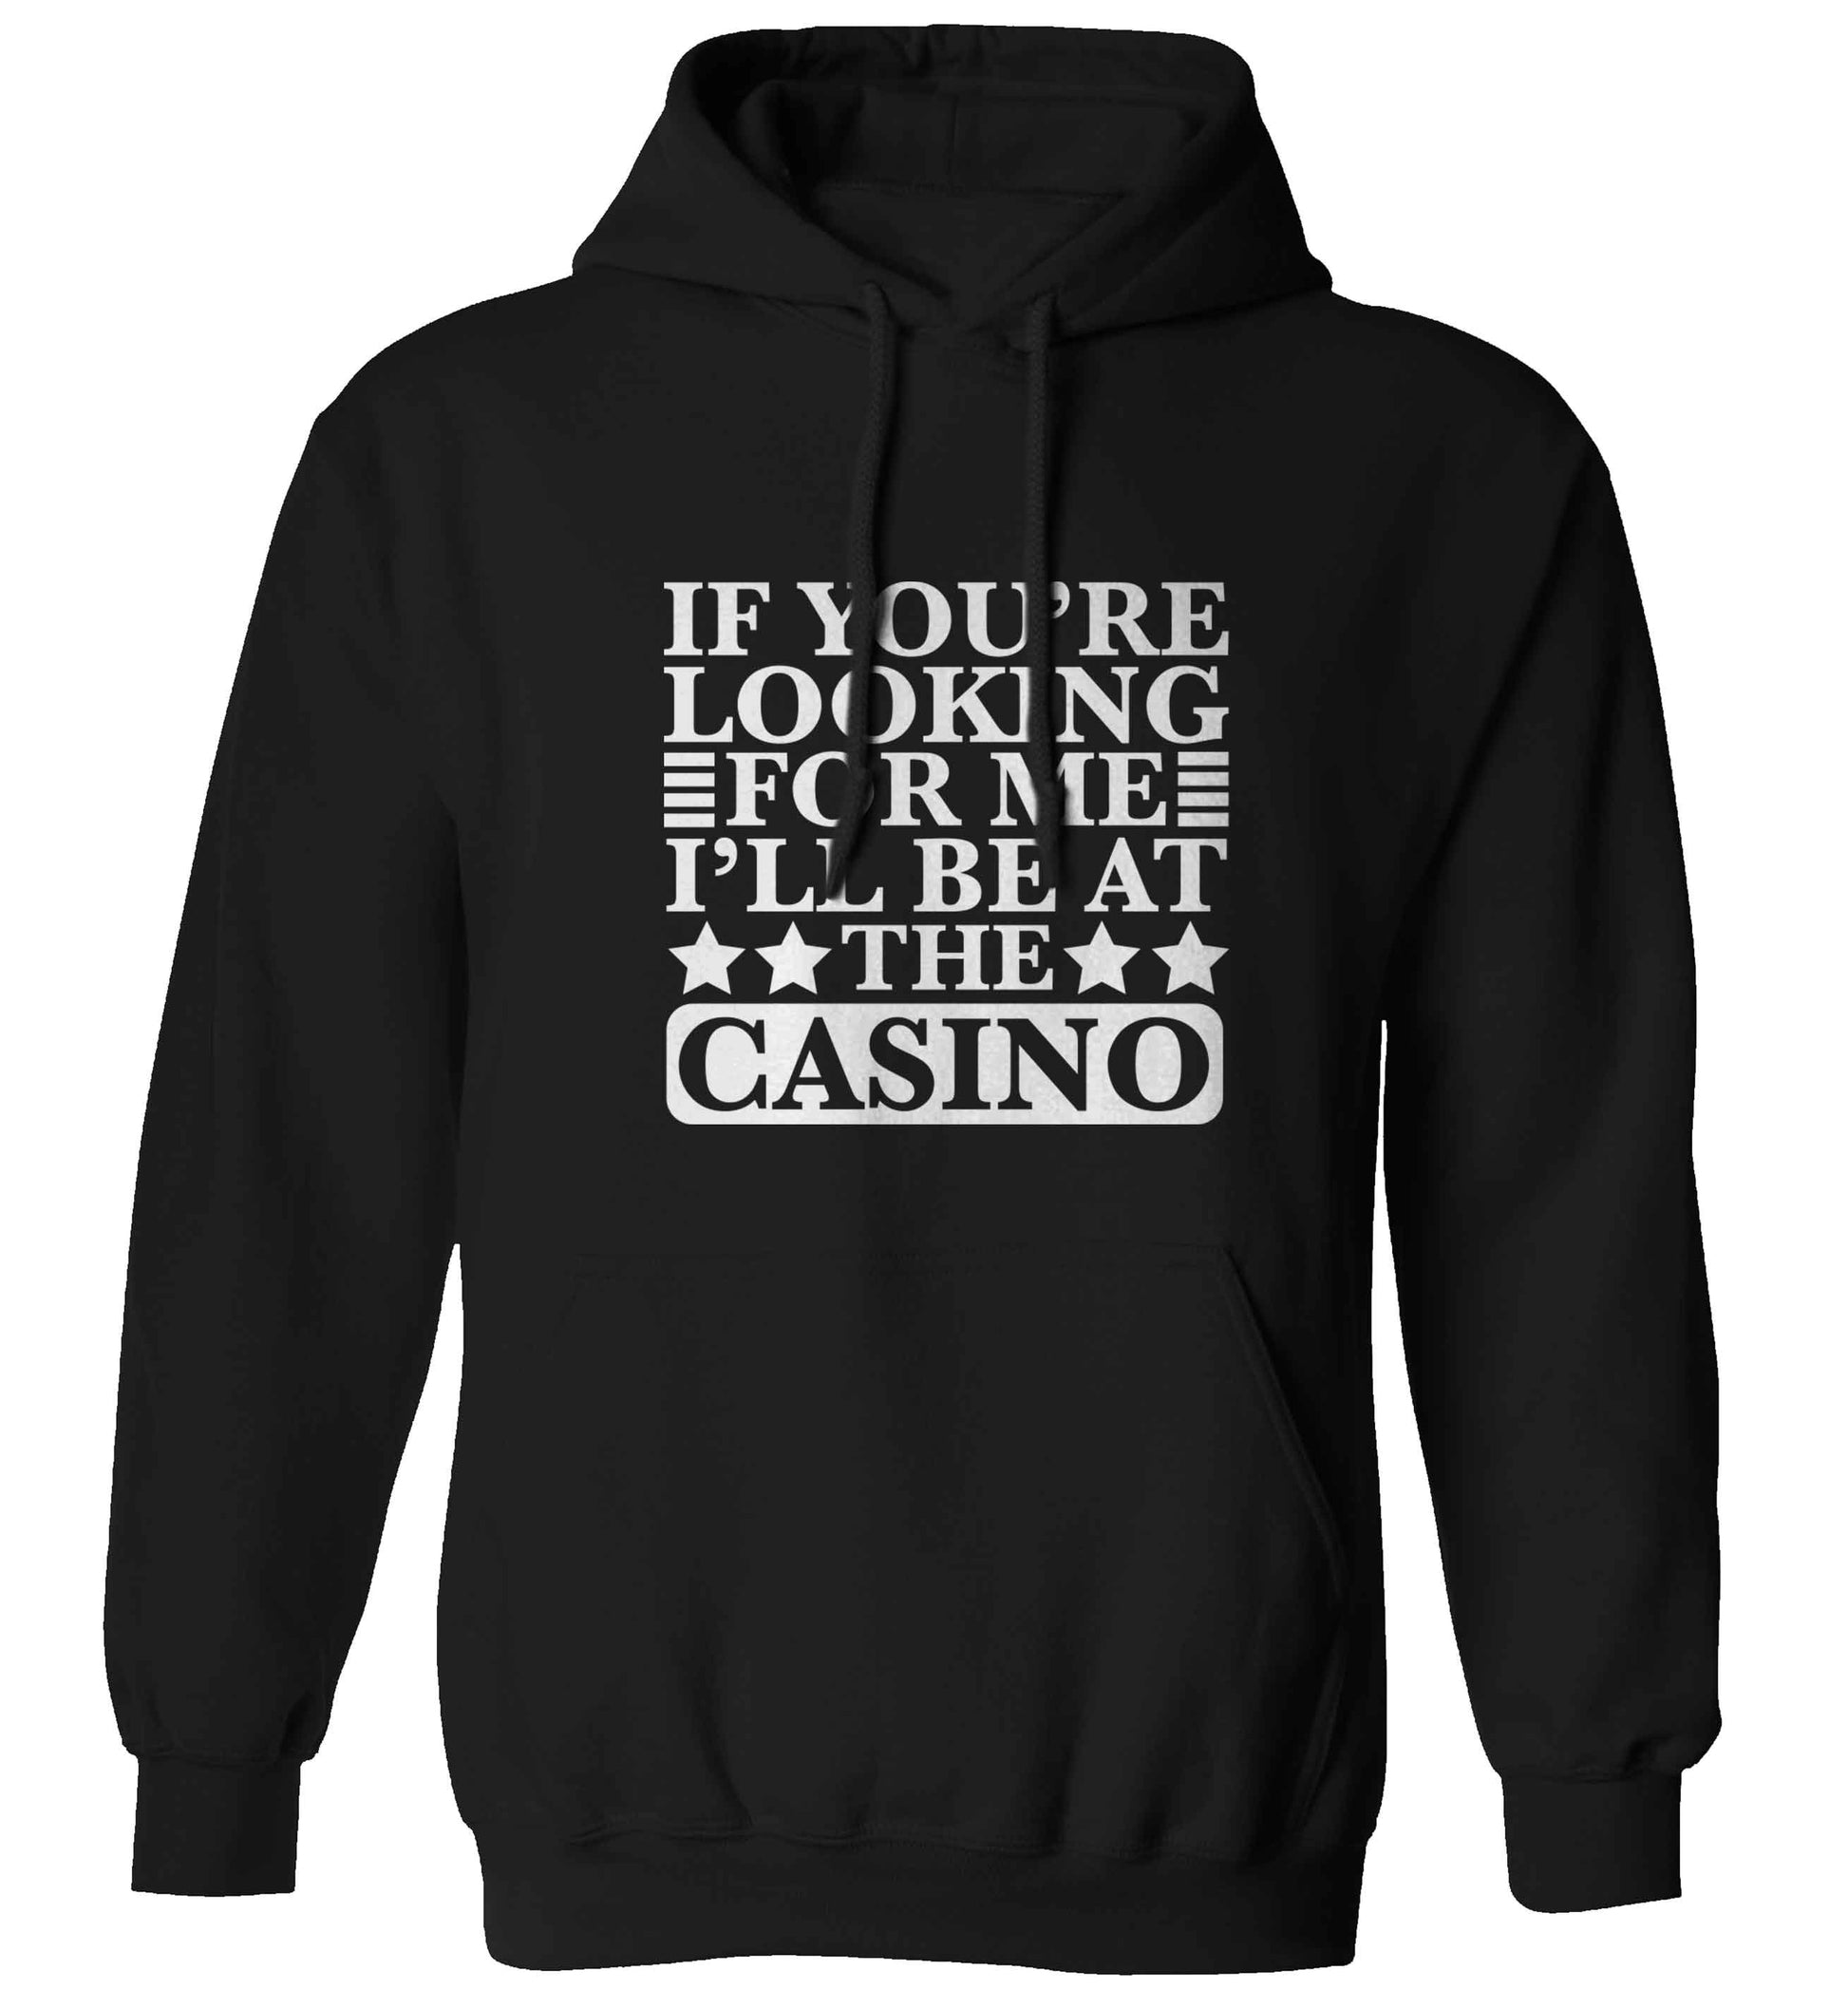 If you're looking for me I'll be at the casino adults unisex black hoodie 2XL